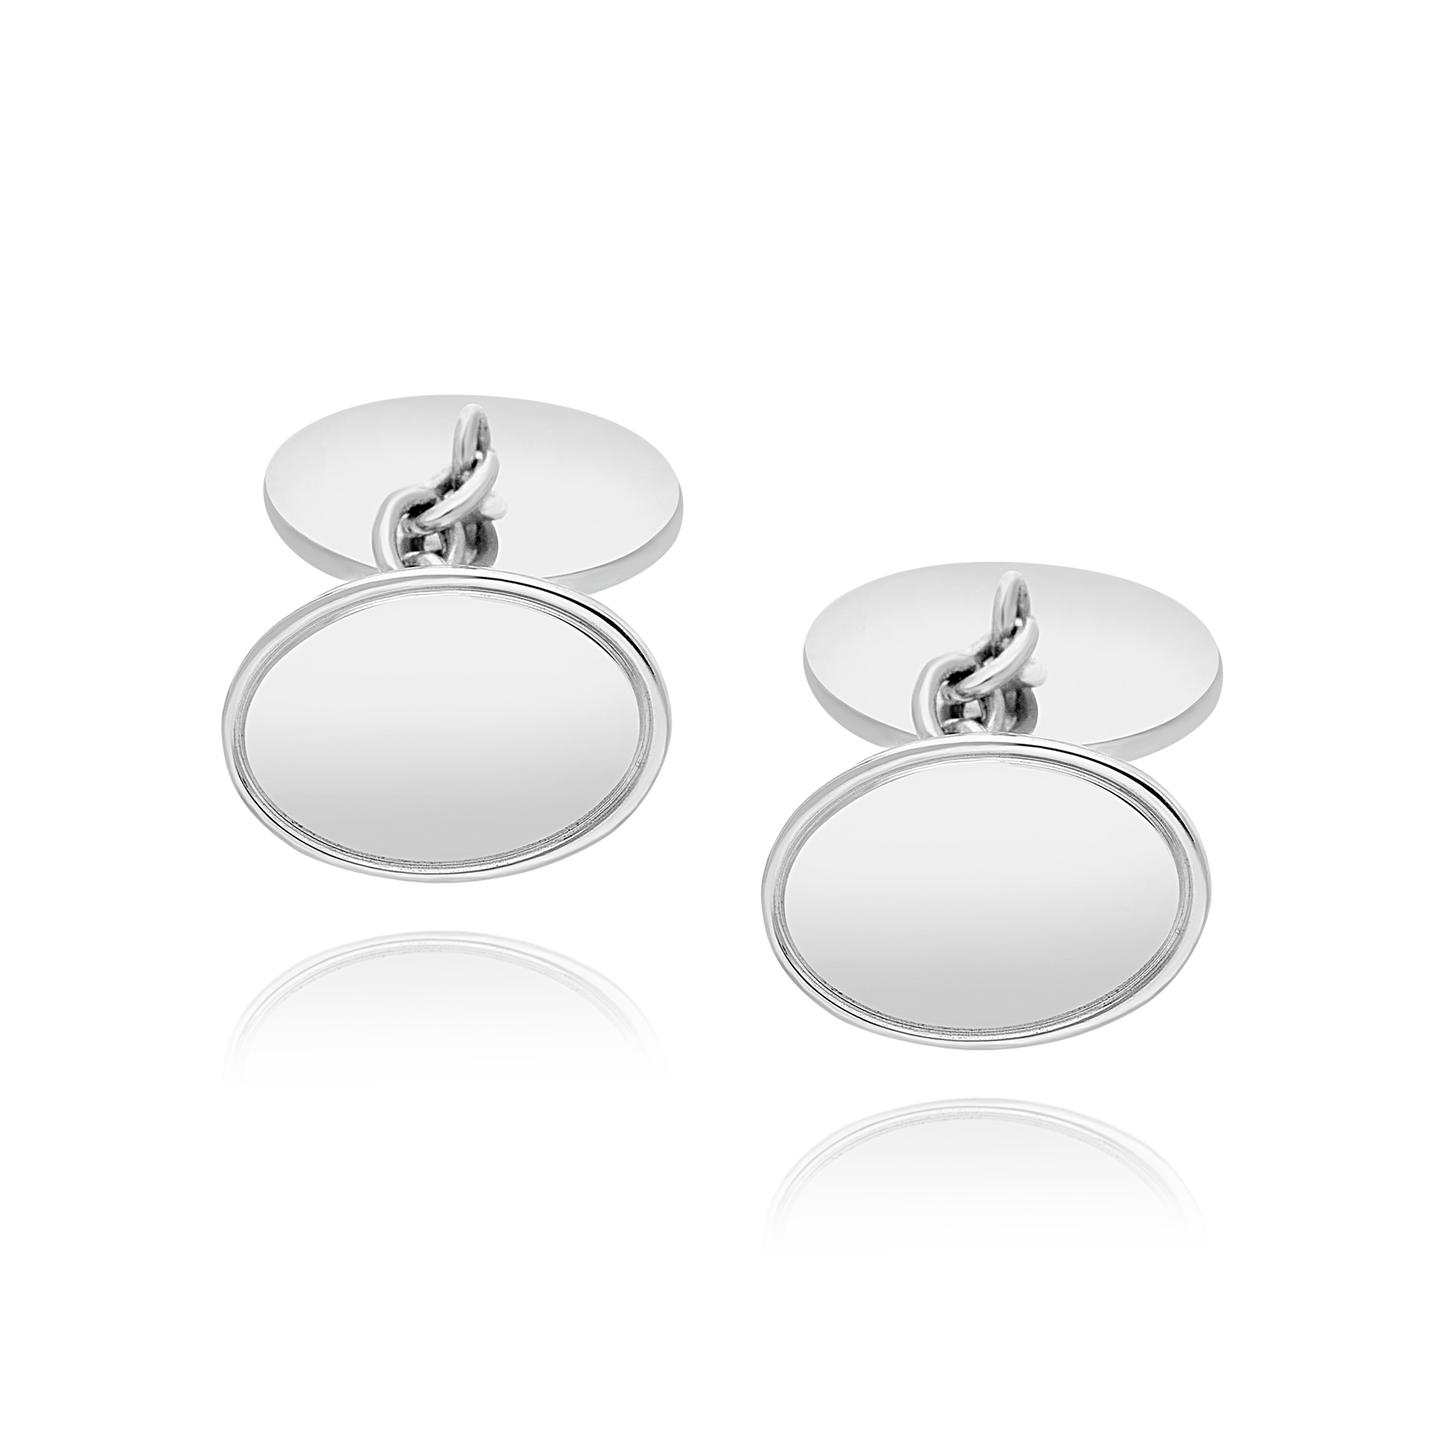 Silver Oval Cufflinks With Engraved Border